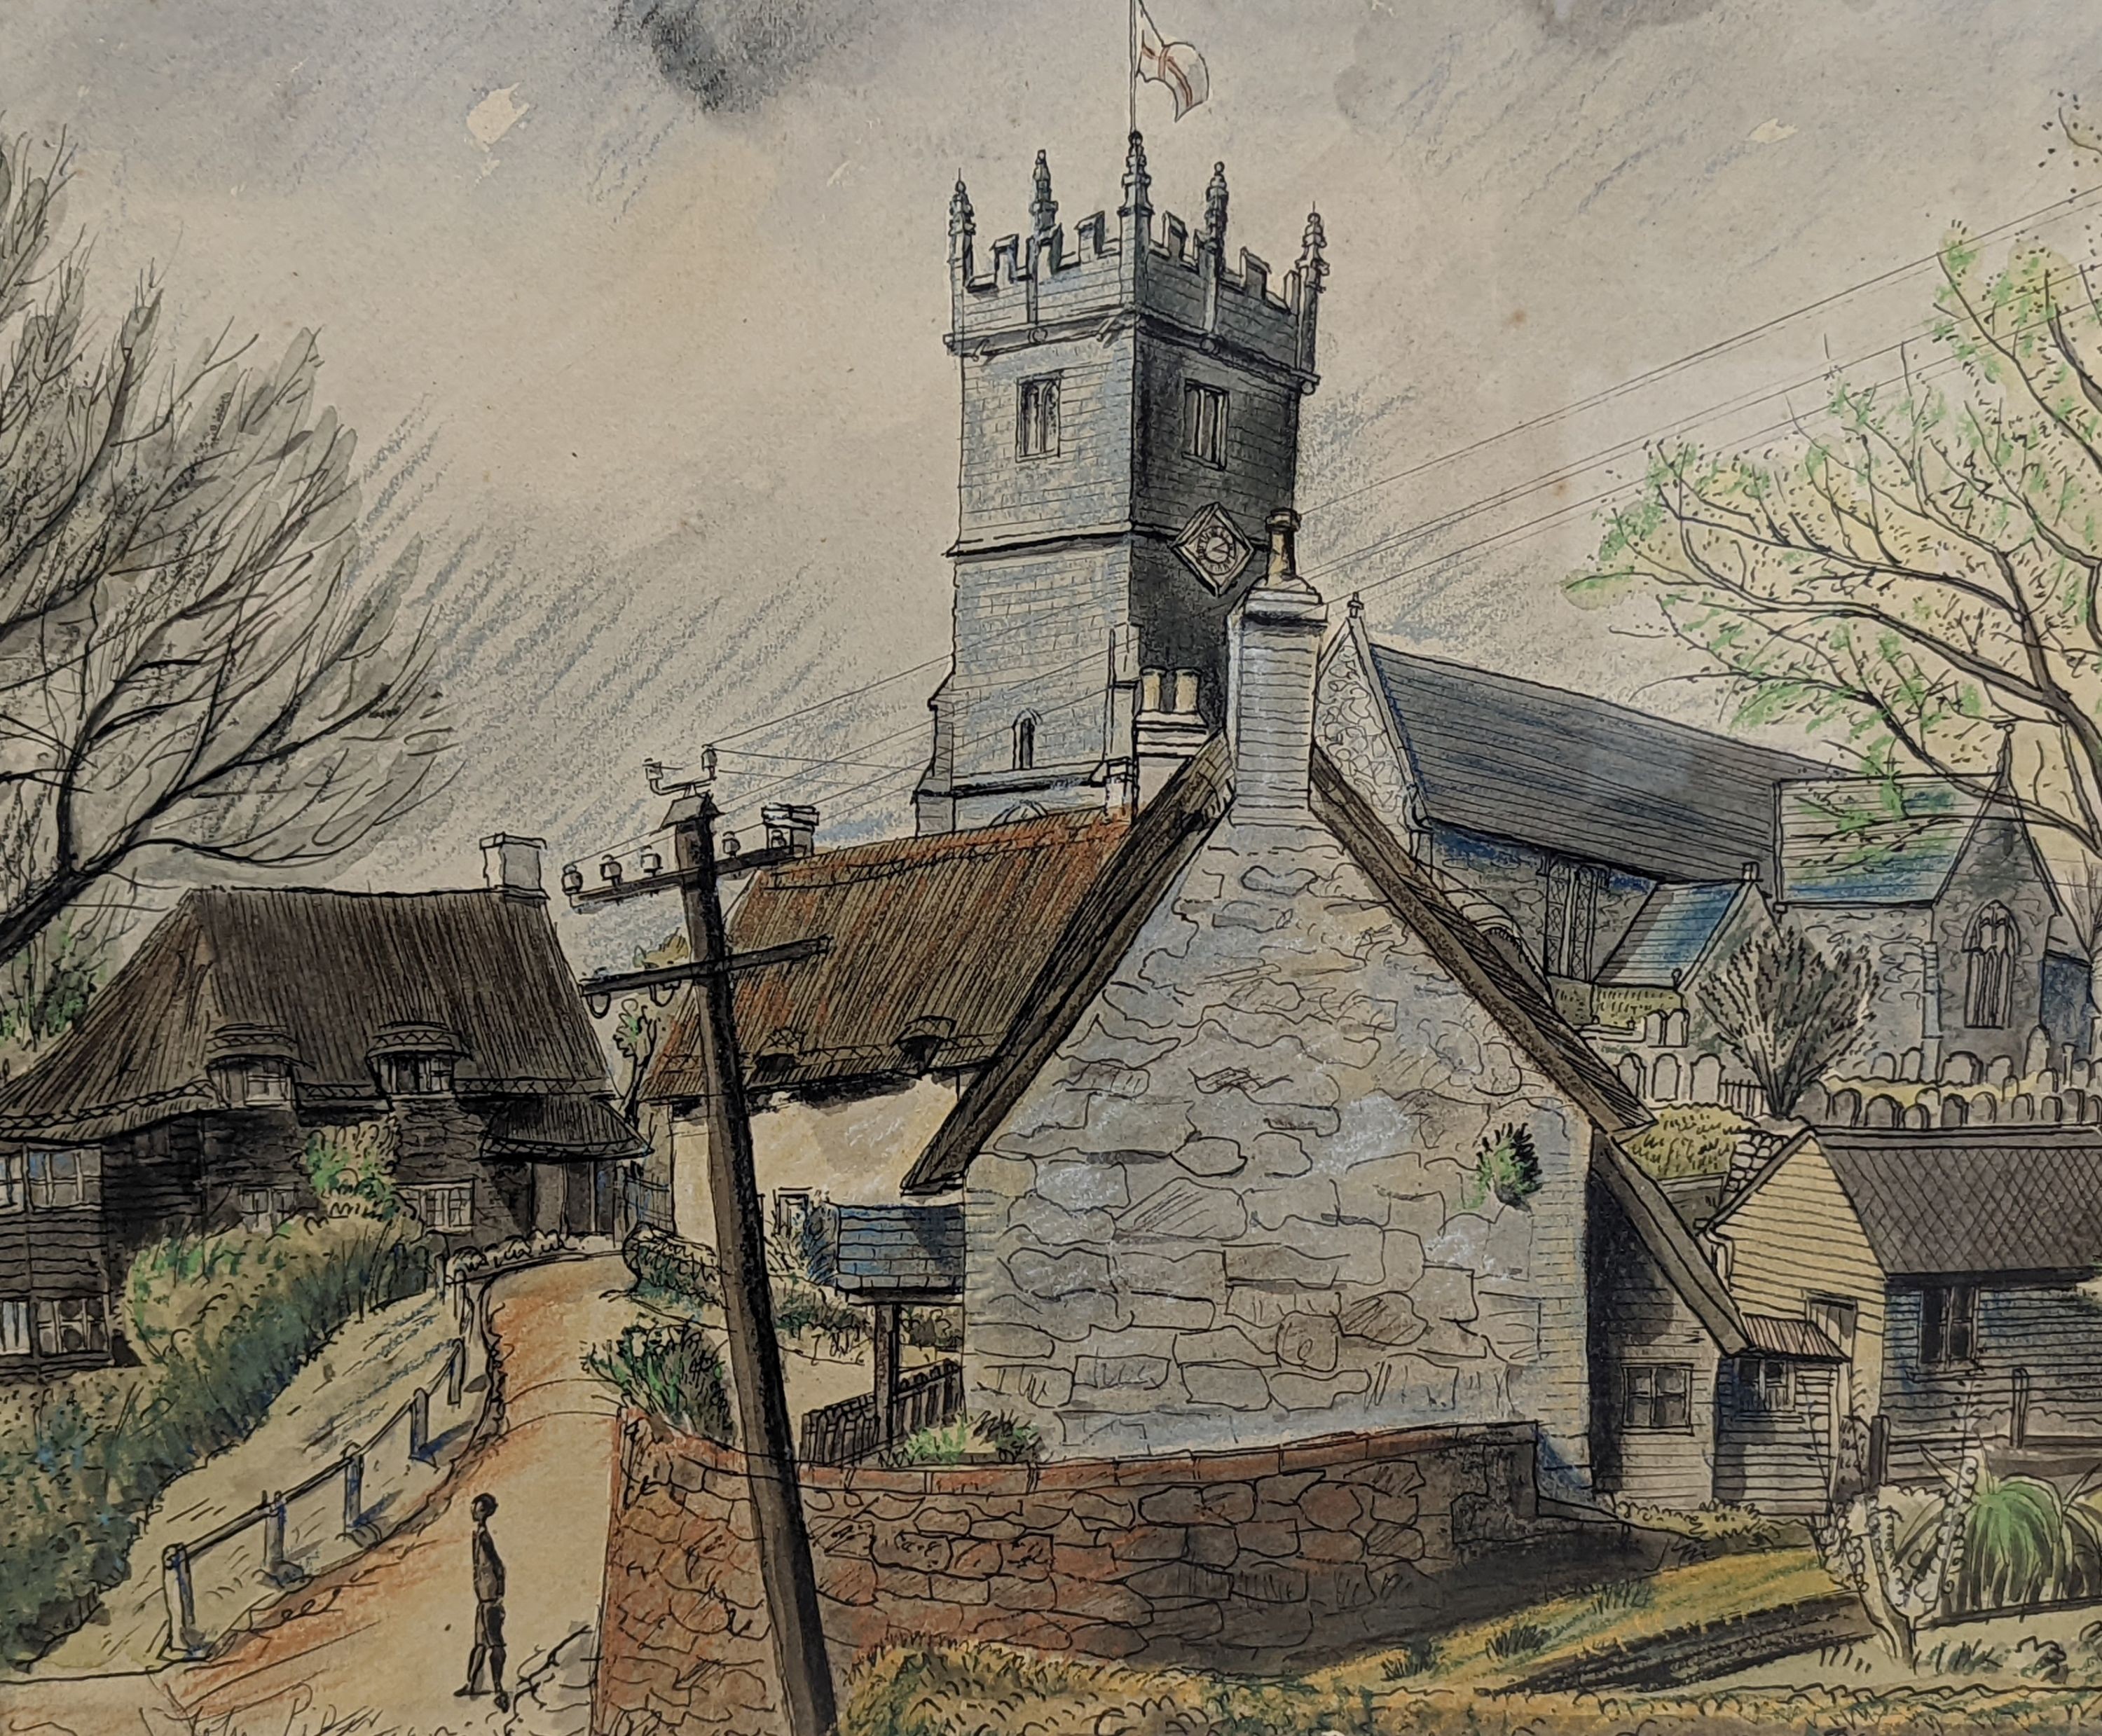 Attributed to John Piper, ink and pastel, Village scene, bears signature, 34 x 42cm